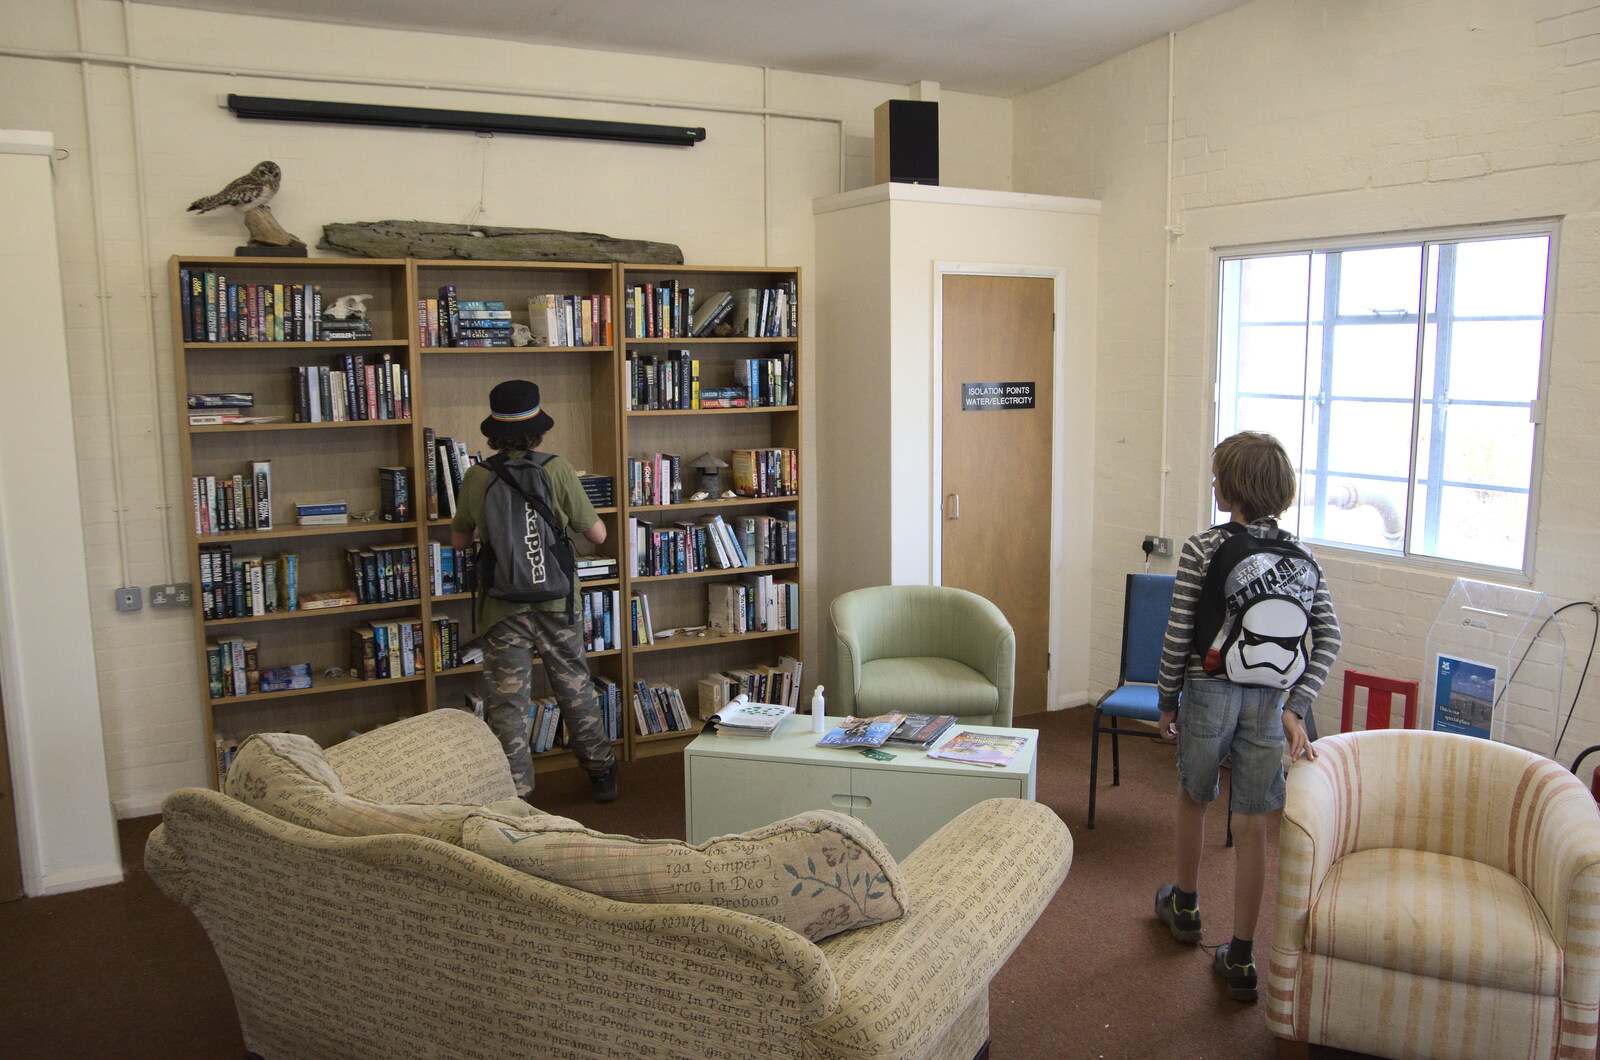 We visit the book shop from A Trip to Orford Ness, Orford, Suffolk - 16th August 2022